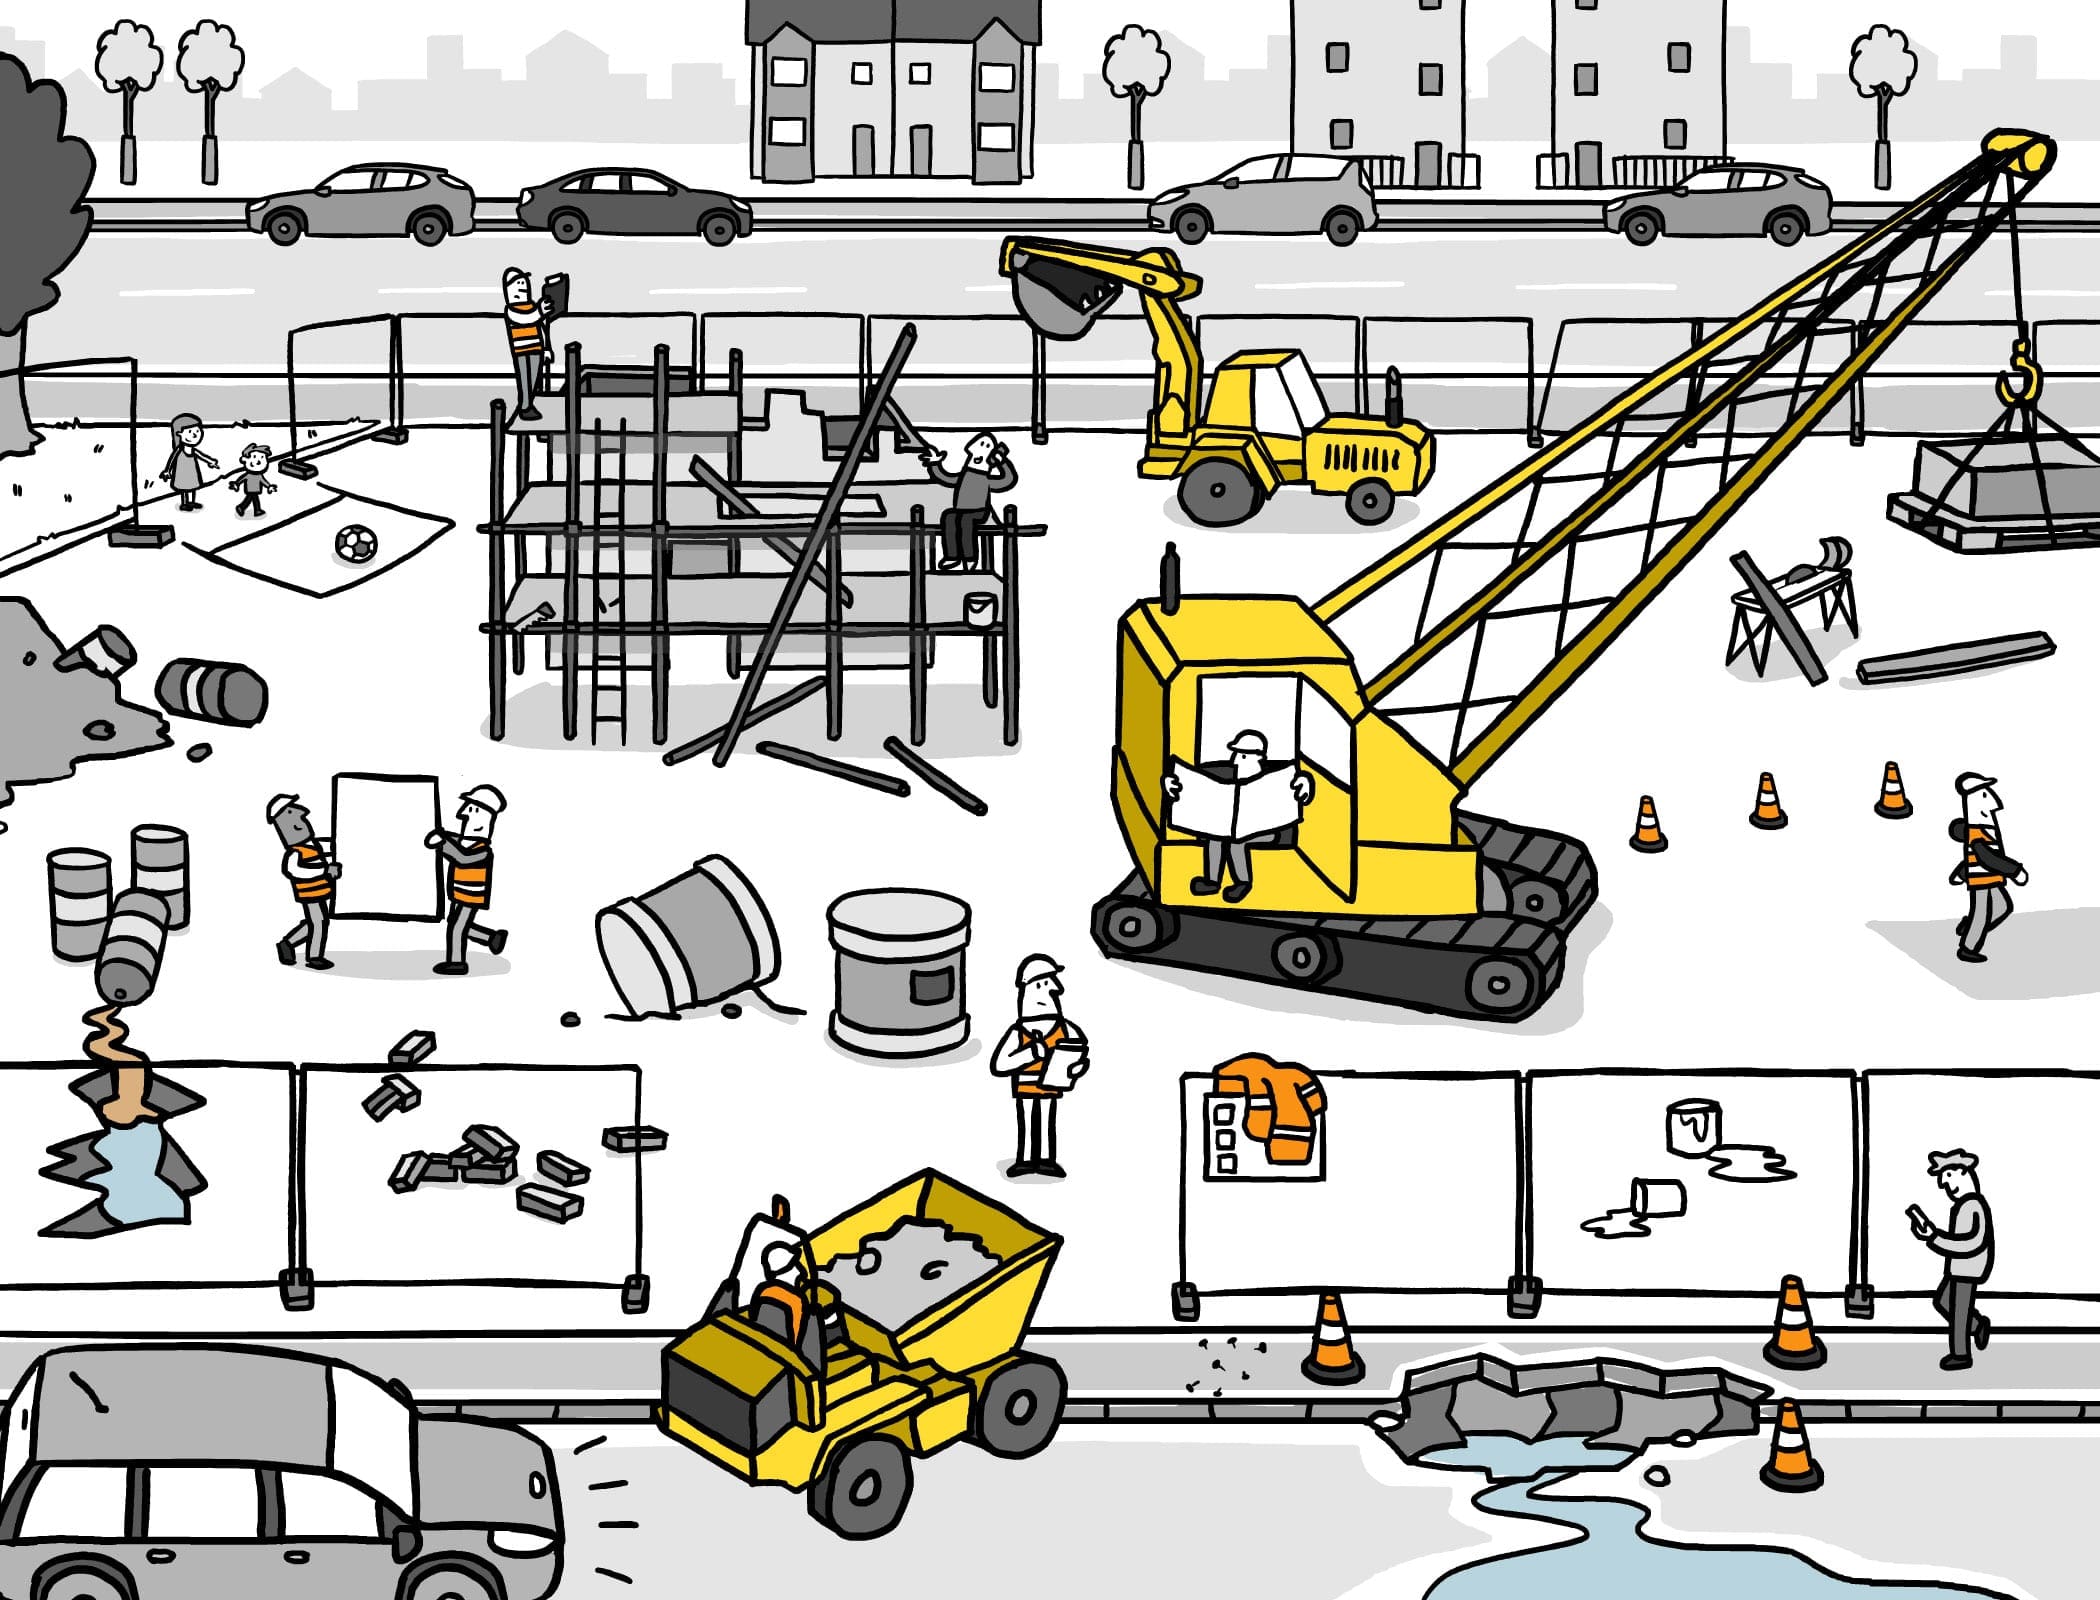 Top 11 Safety Hazards in Construction - ECL Civil Engineering